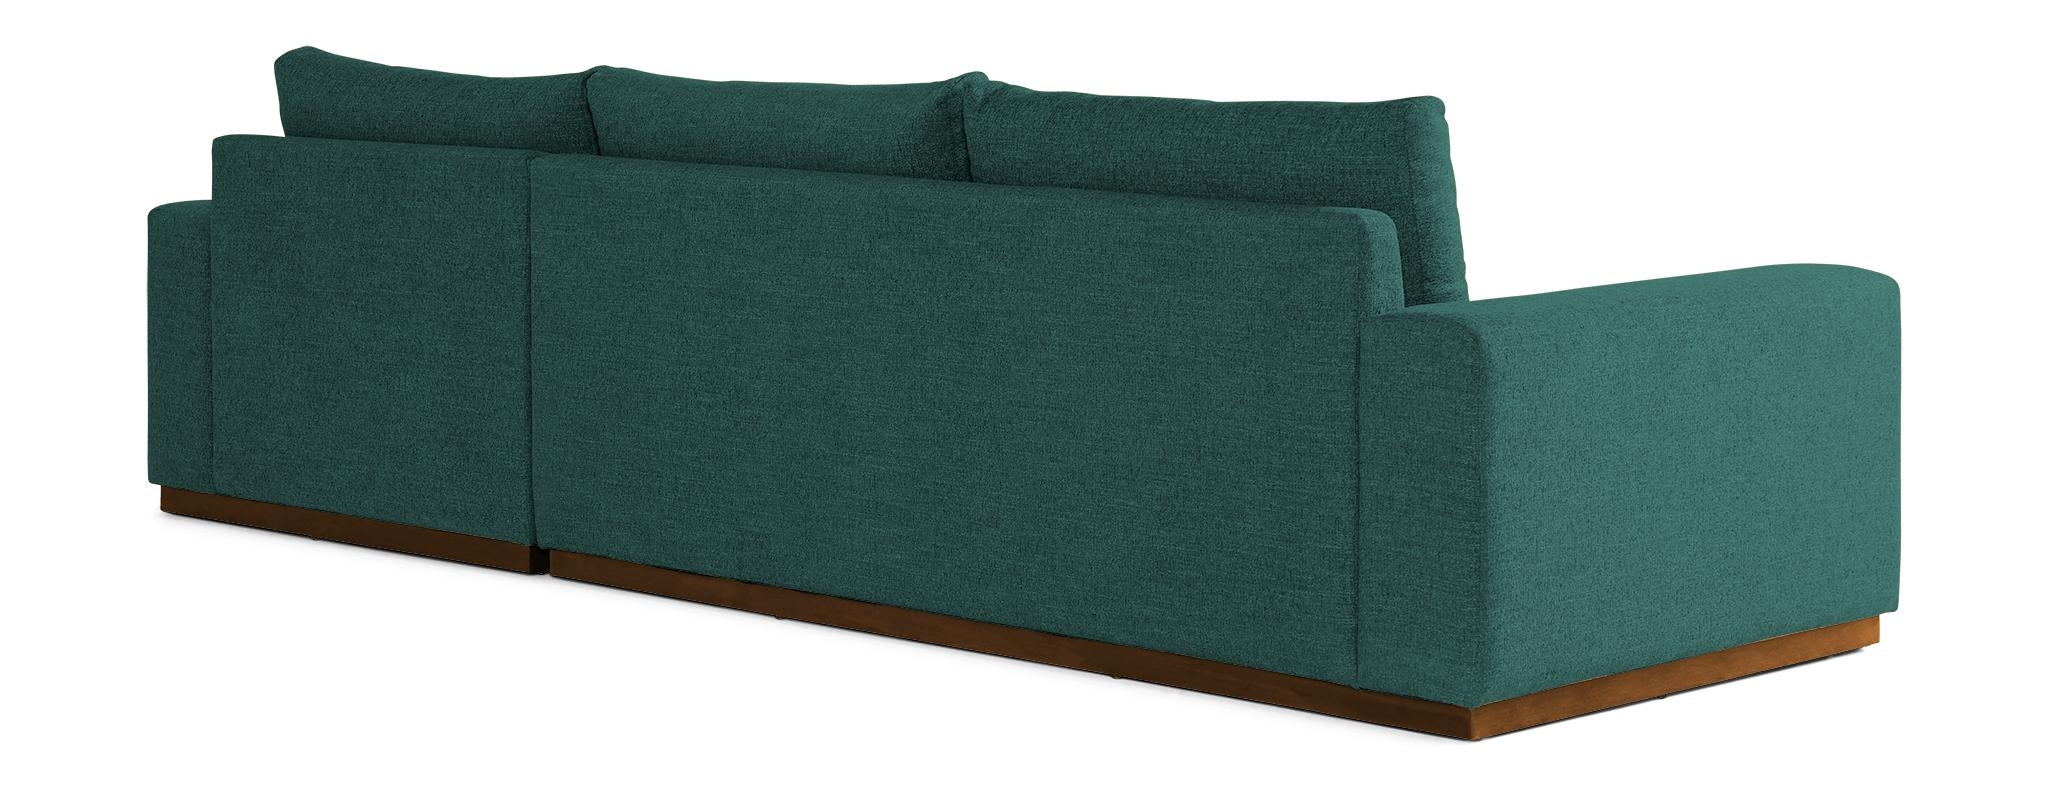 Blue Holt Mid Century Modern Sectional with Storage - Prime Peacock - Mocha - Right - Image 4